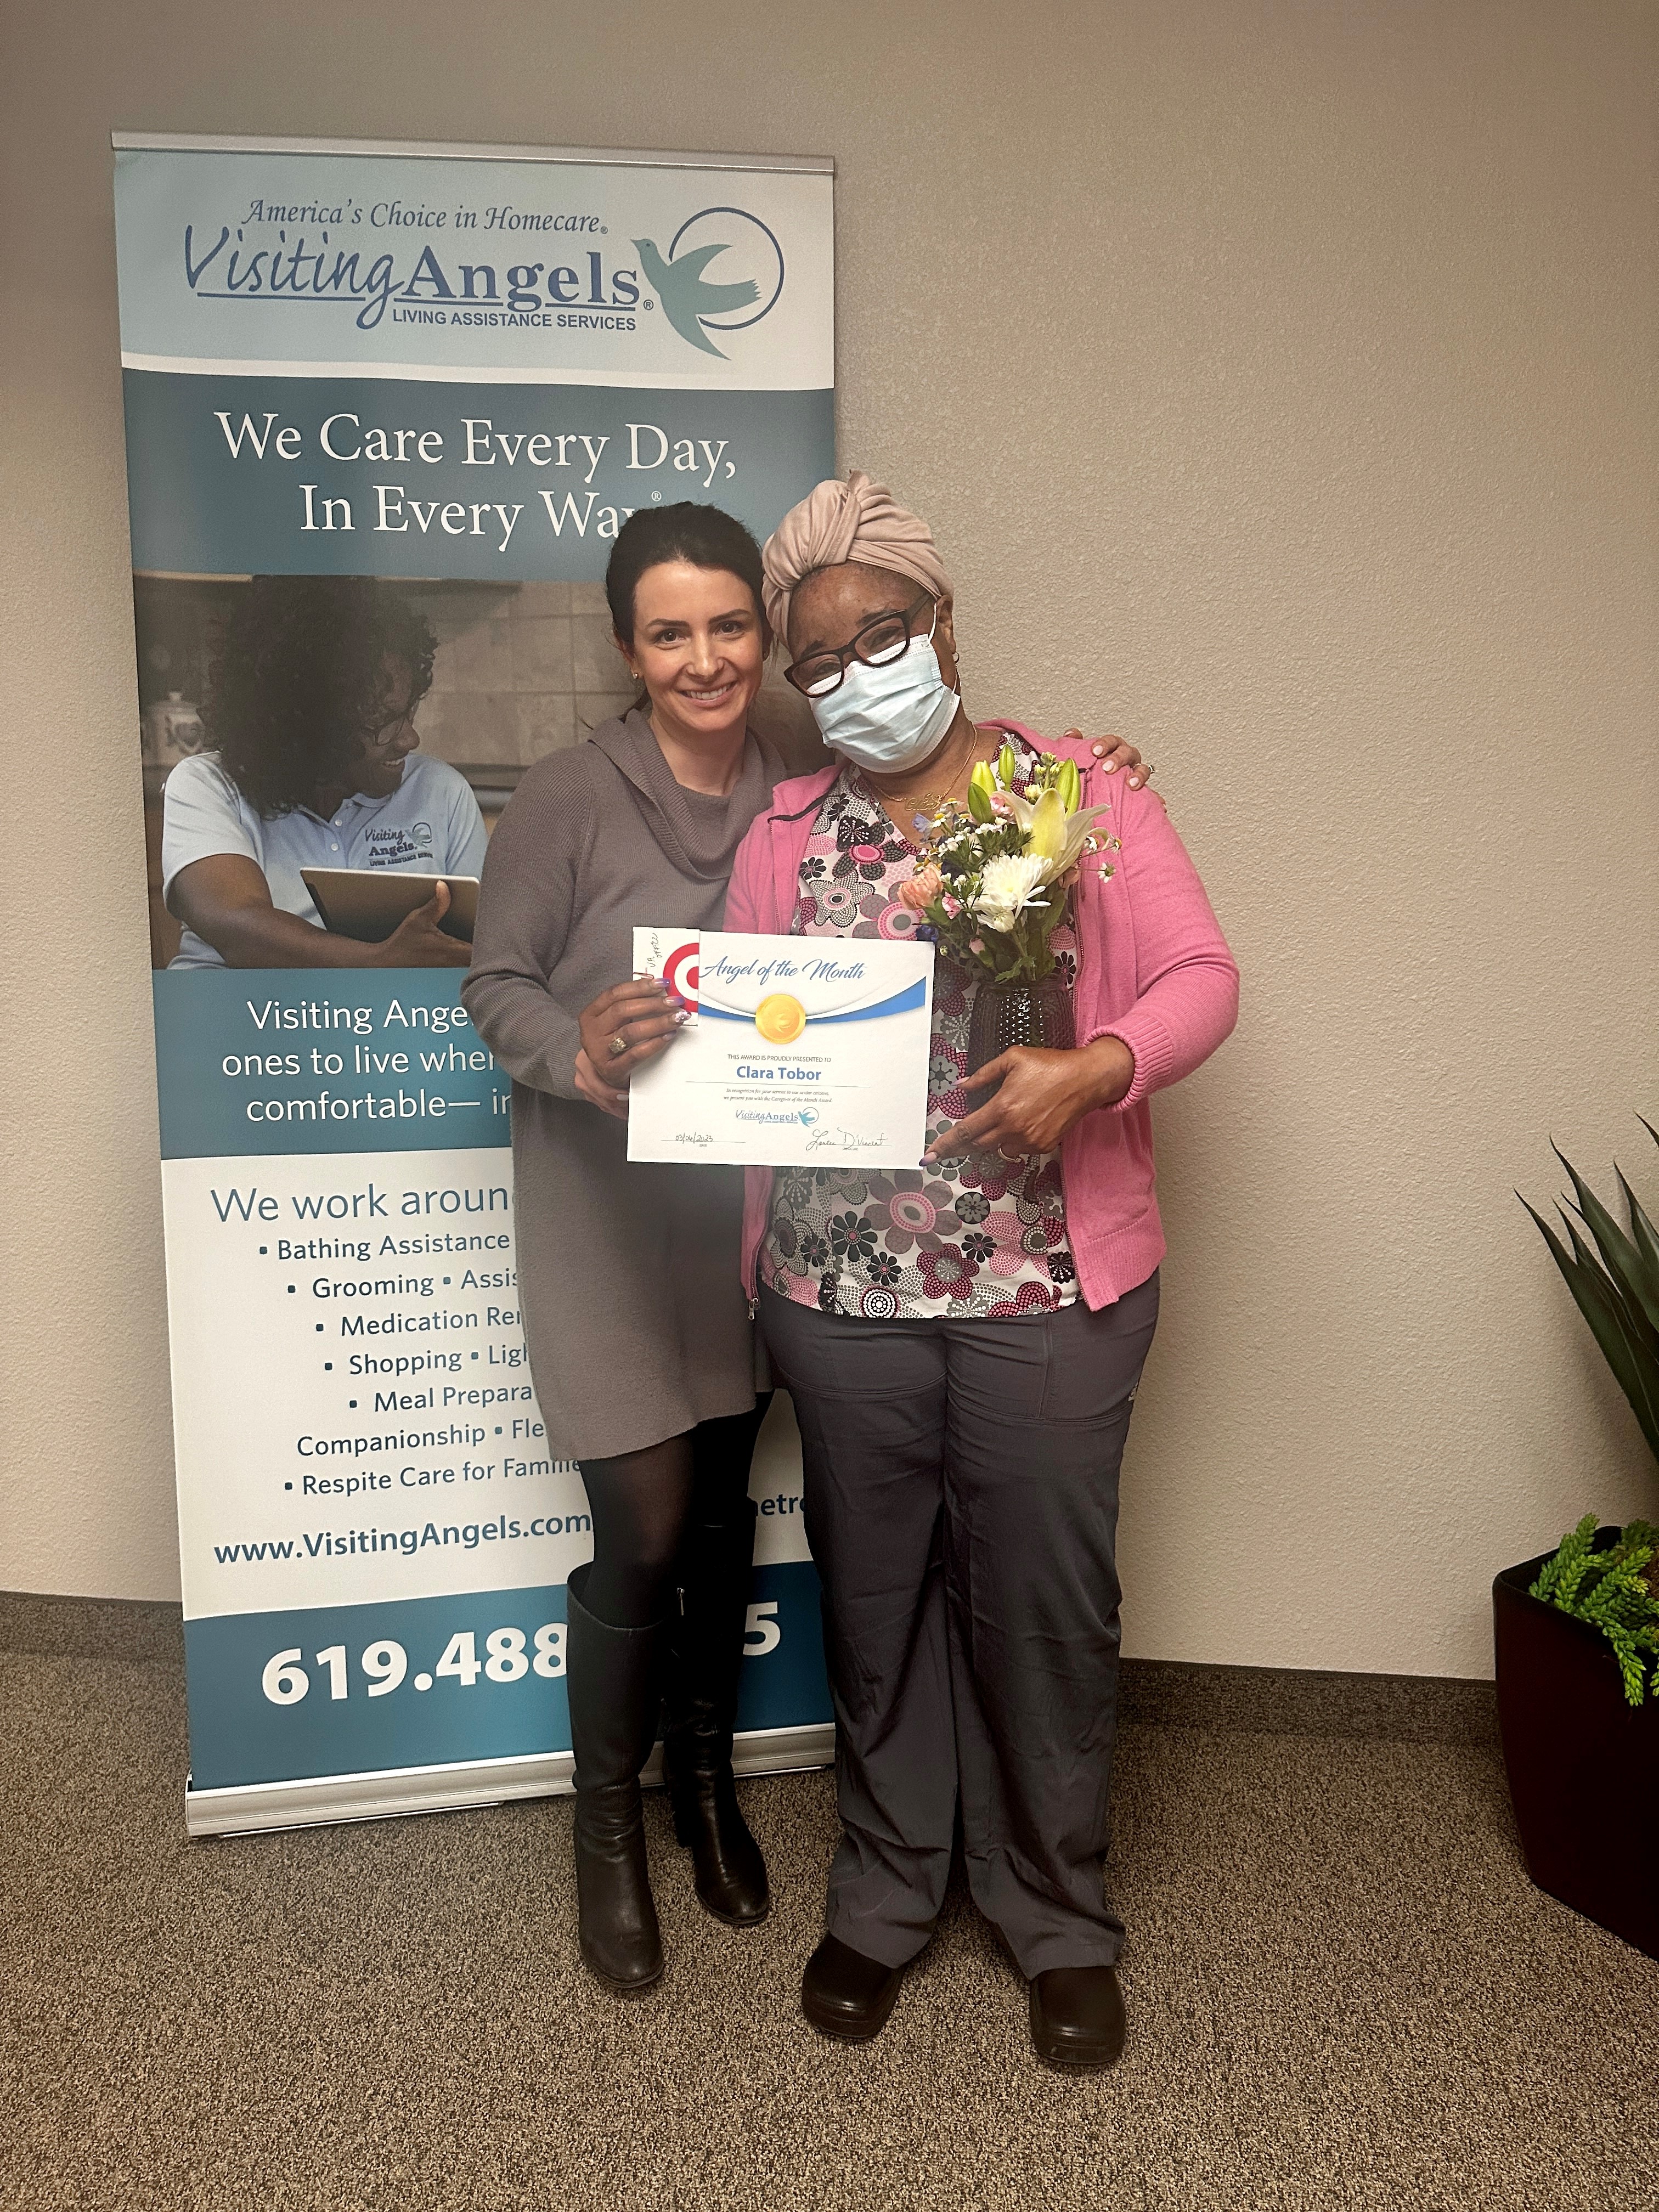 Care Leader of the month - Clara